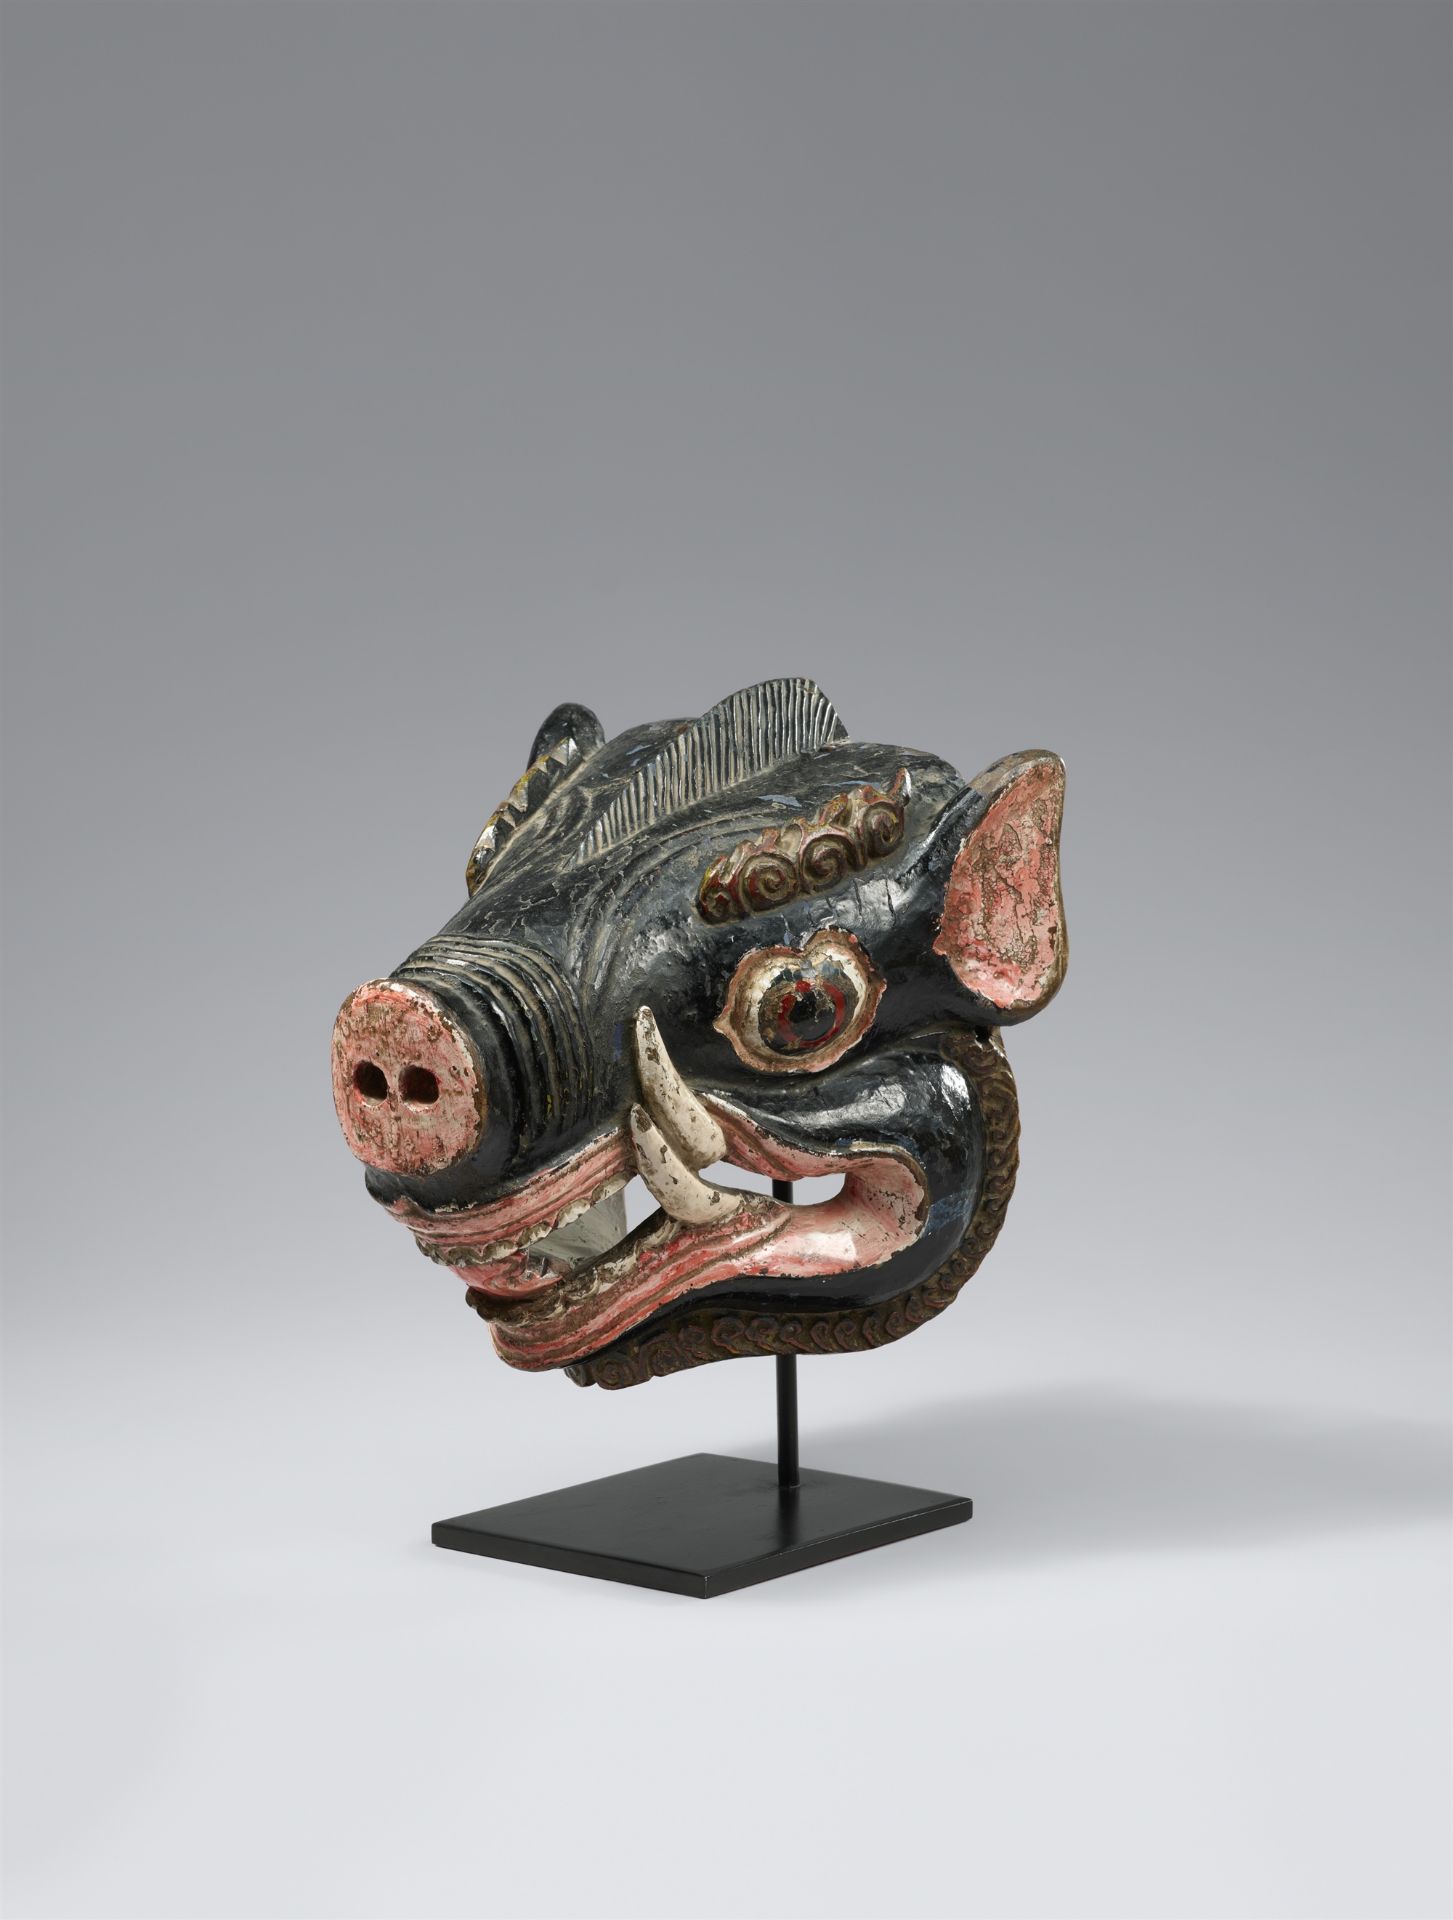 A Cham dance mask of a boar. Tibet, 18th/19th century